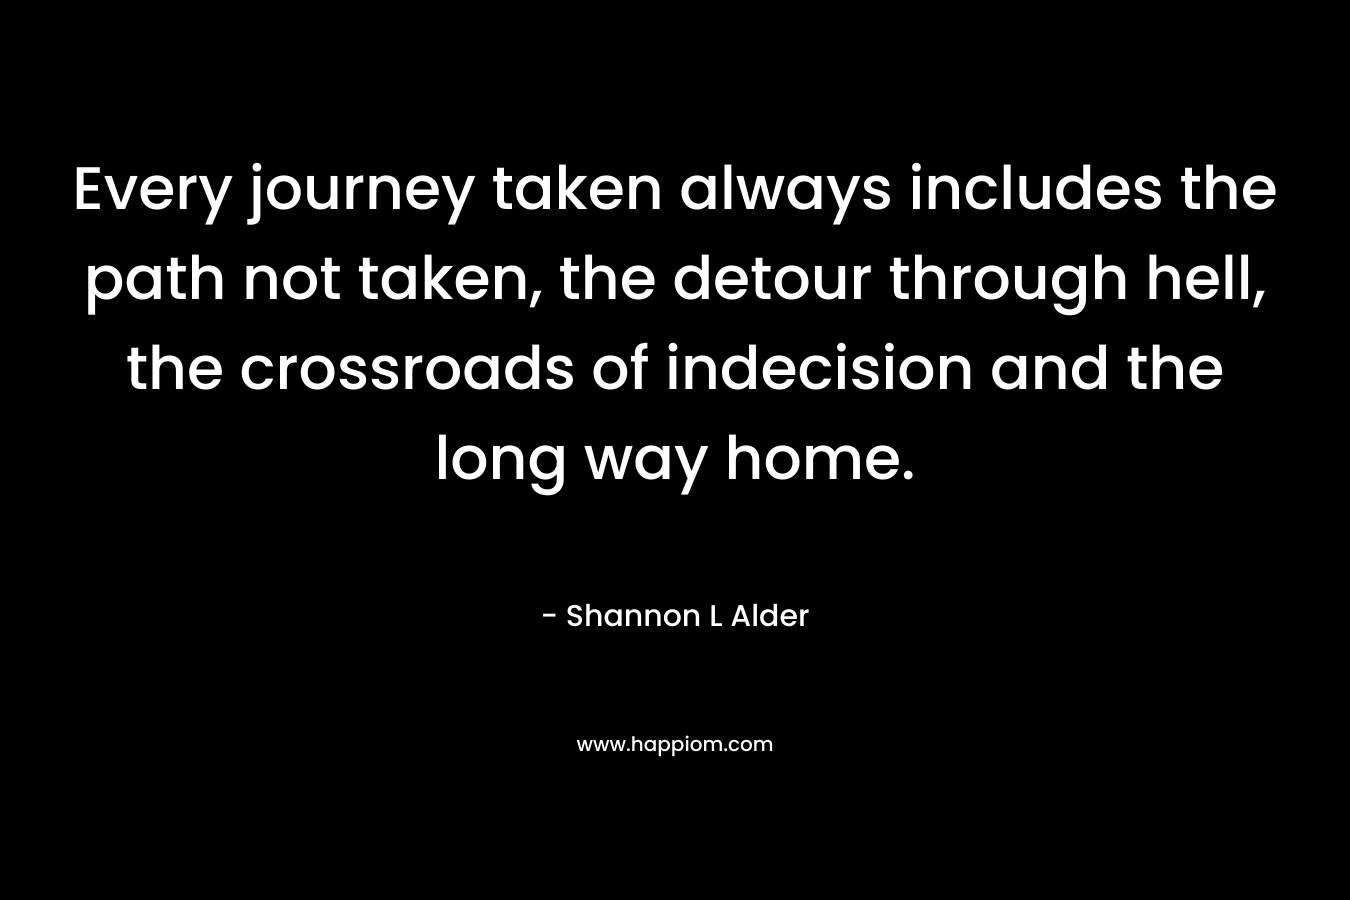 Every journey taken always includes the path not taken, the detour through hell, the crossroads of indecision and the long way home.